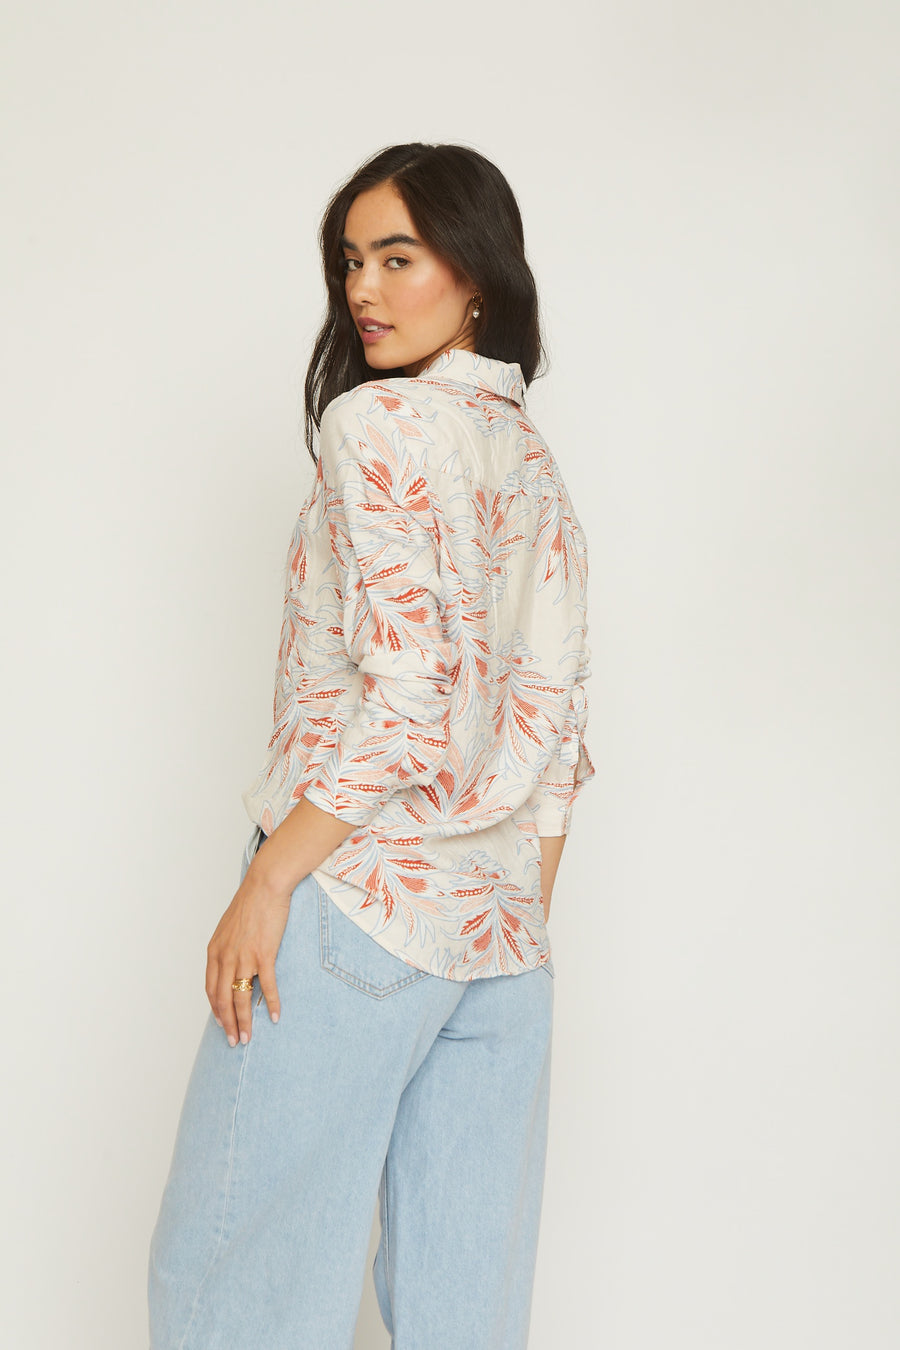 No Srcipt image - Images of 6 of 6 Floral Printed Spring Long Sleeve Button Down White with Red and Blue Floral Design